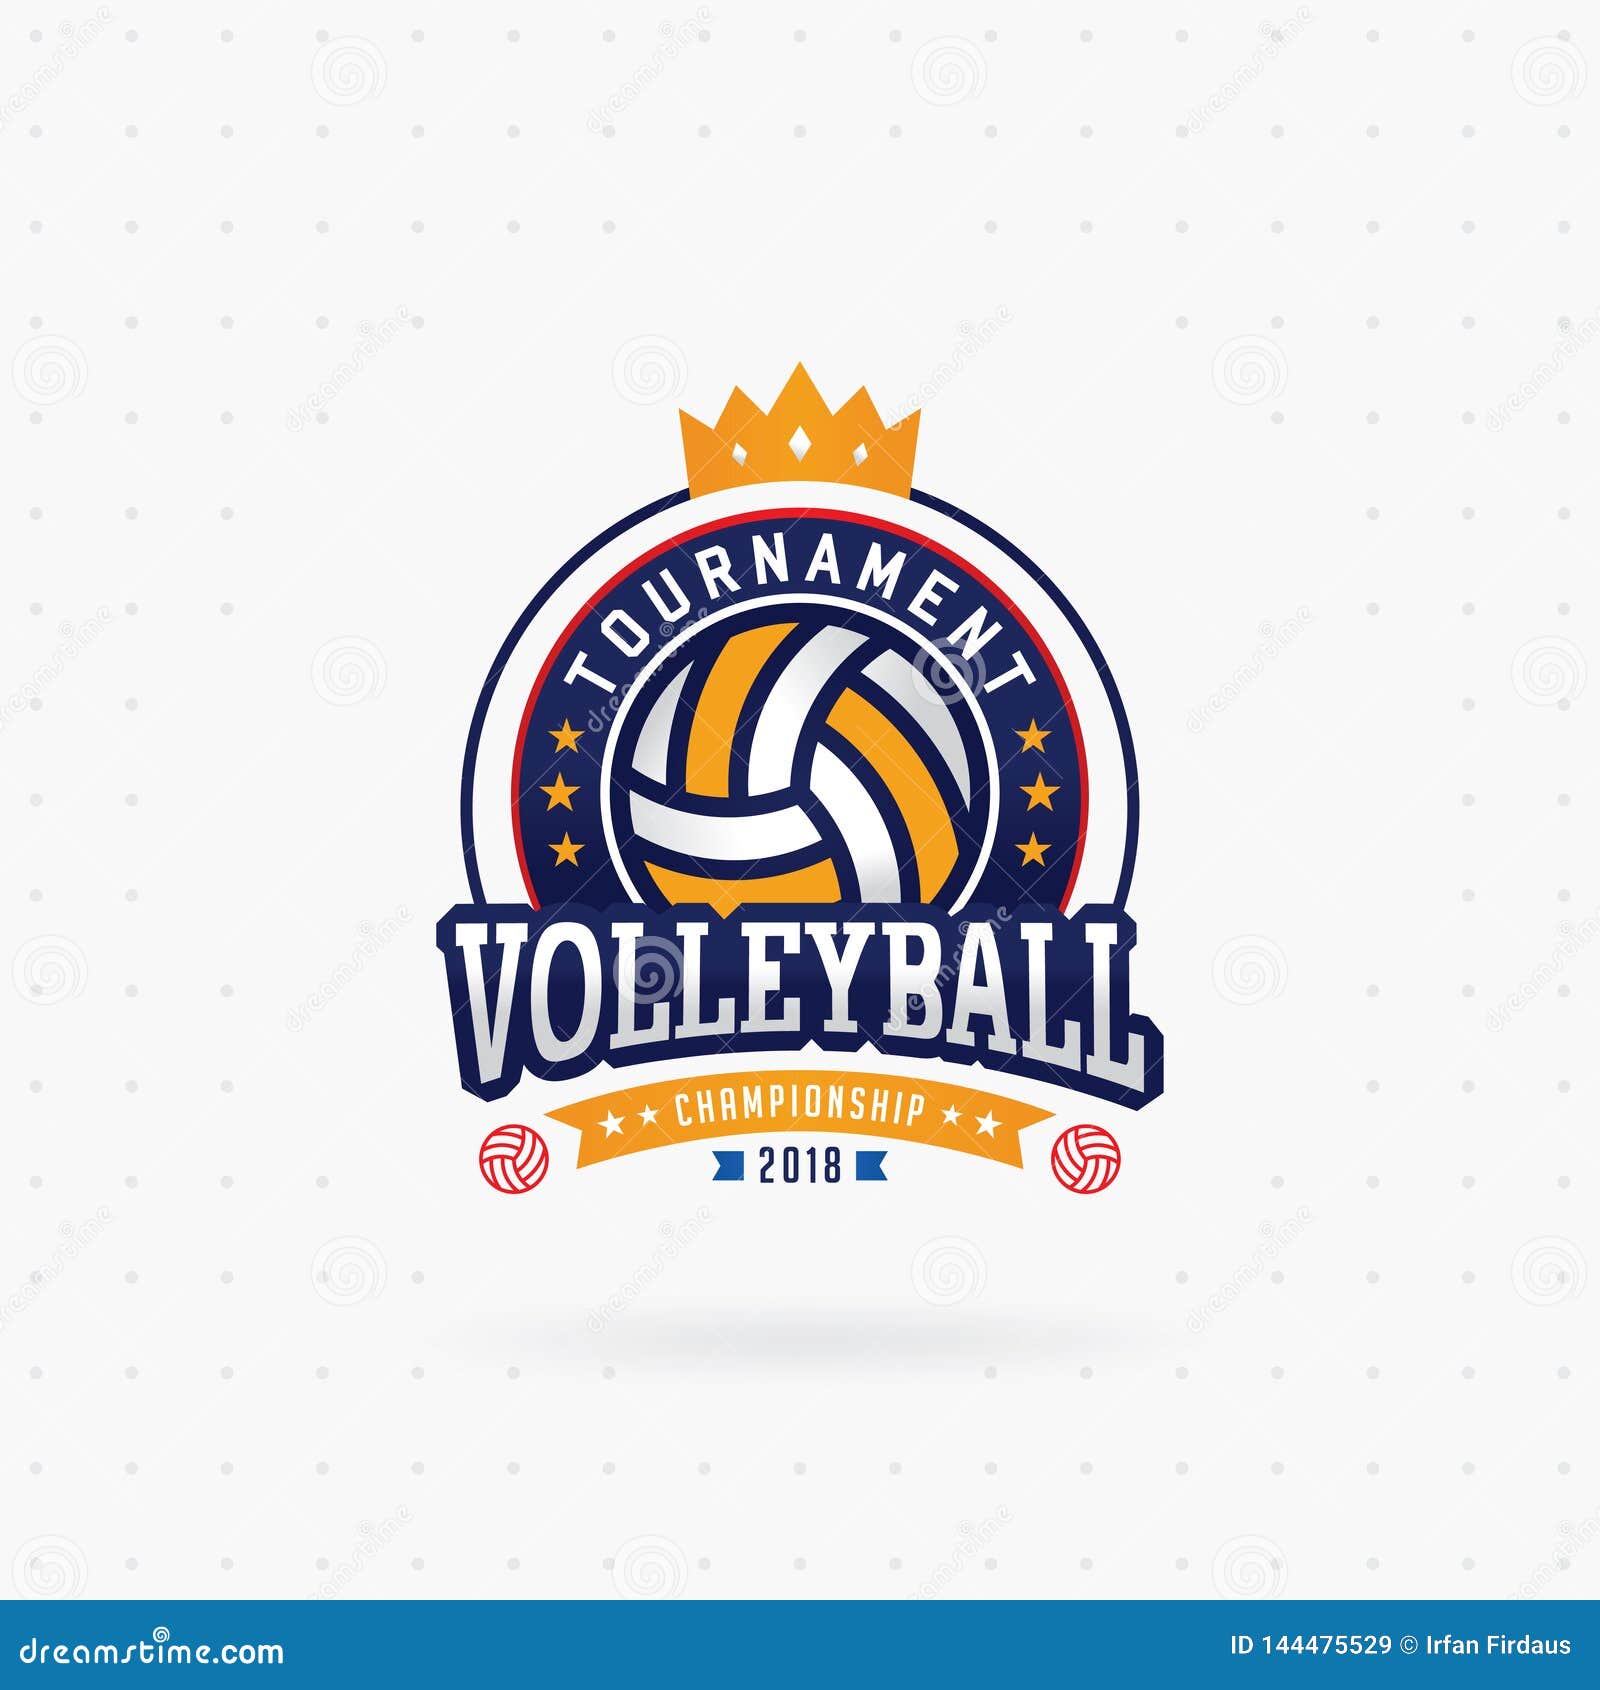 Volleyball tournament logo stock vector. Illustration of club - 144475529